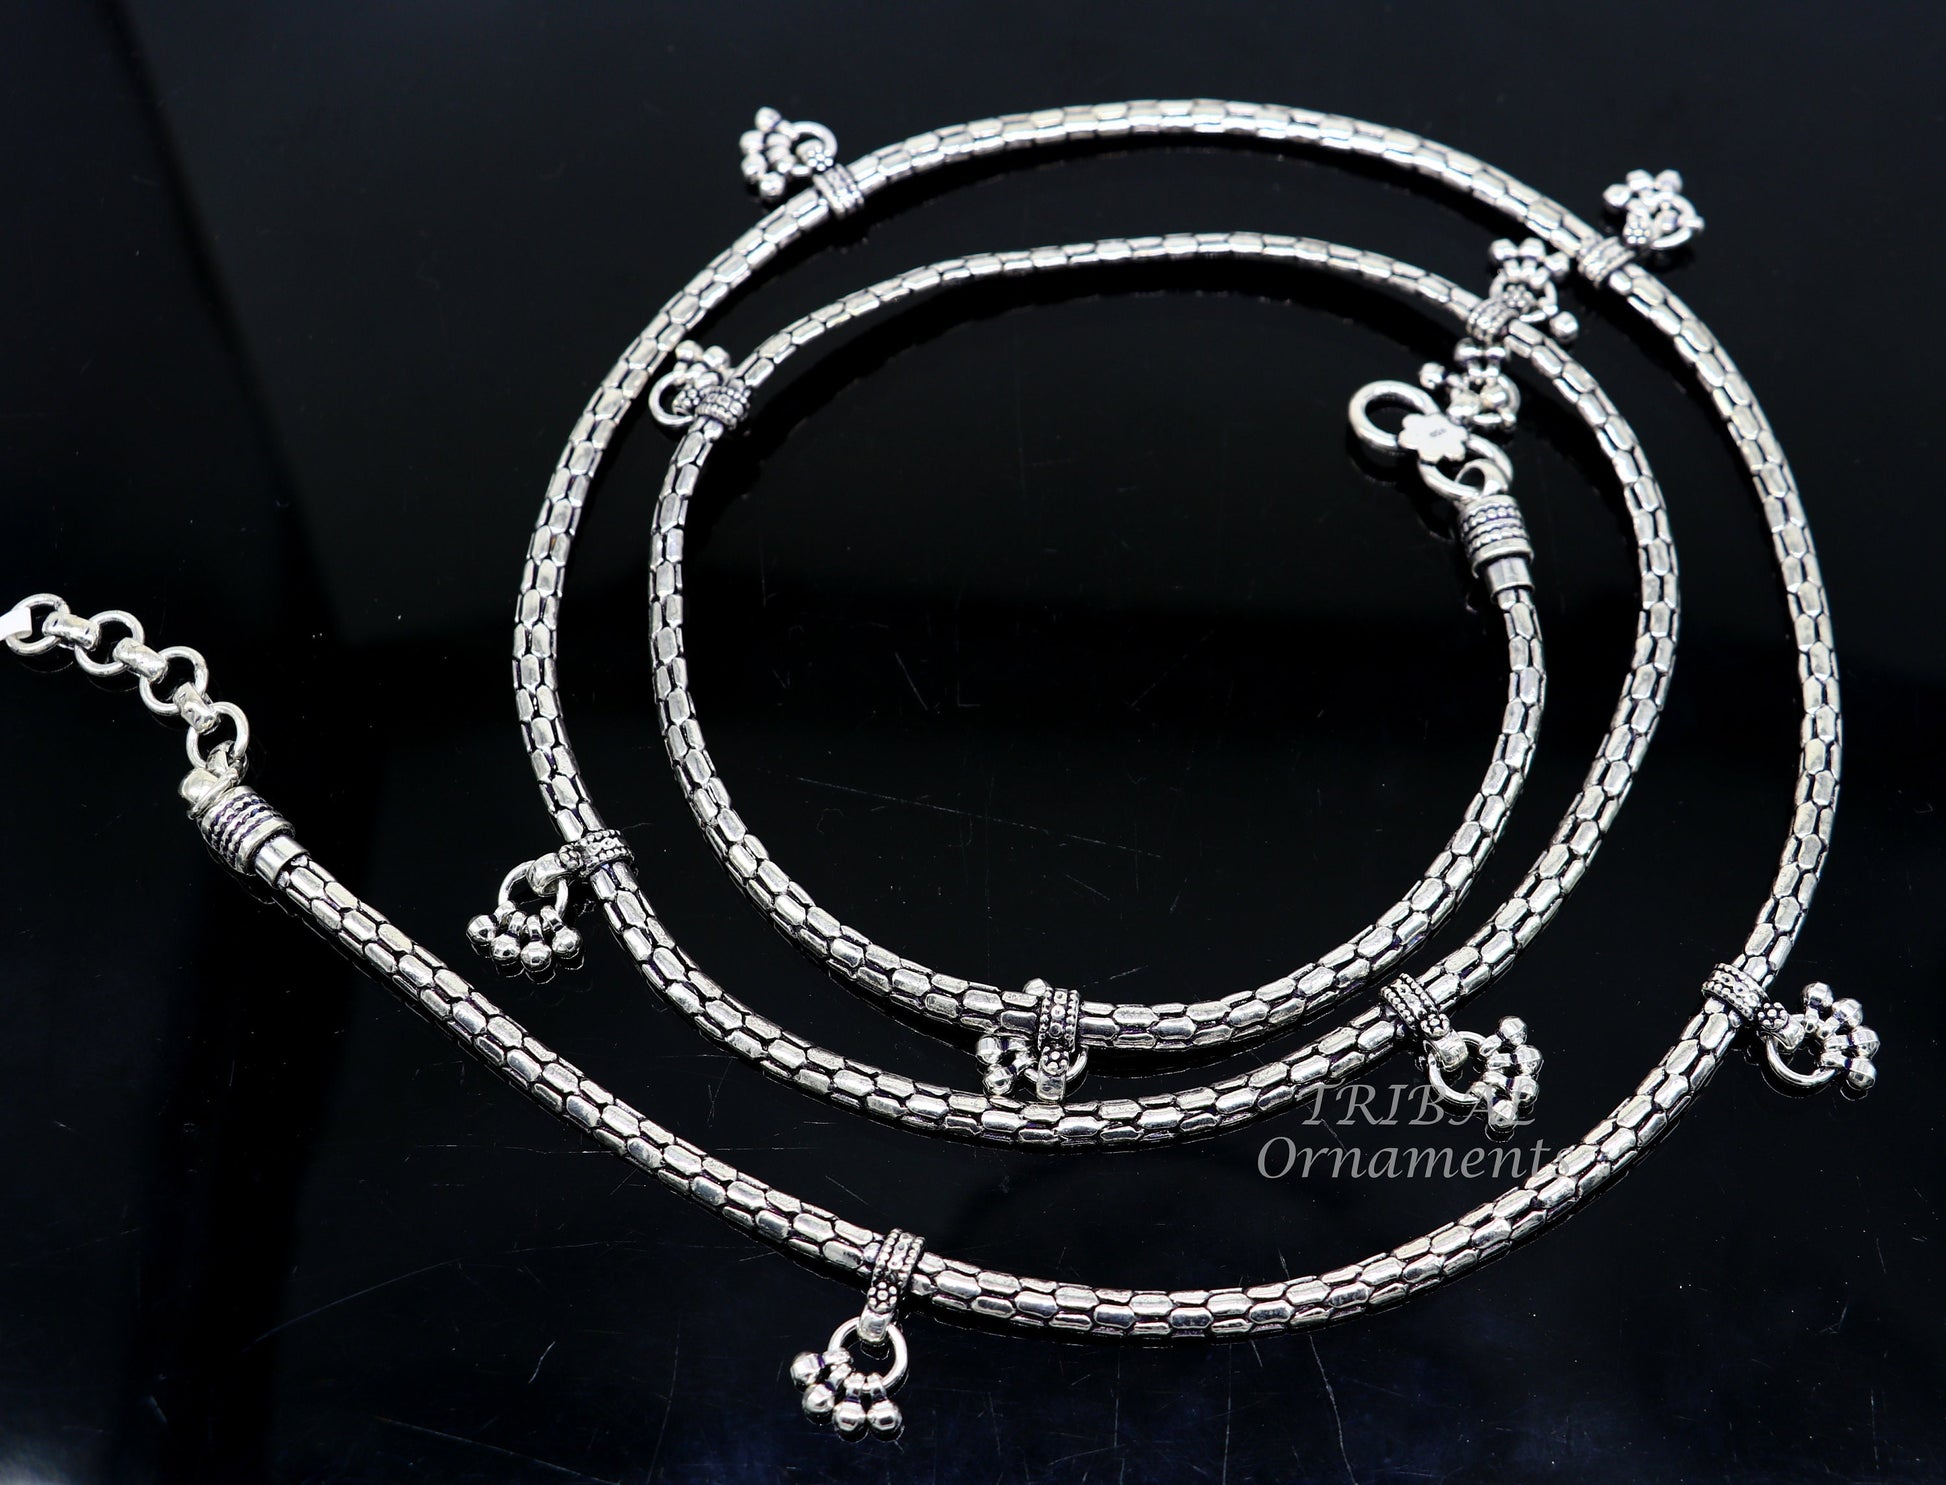 4.5mm 925 sterling silver handmade vintage unique design solid chain belly chain waist chain, saree chain, wedding jewelry wch24 - TRIBAL ORNAMENTS